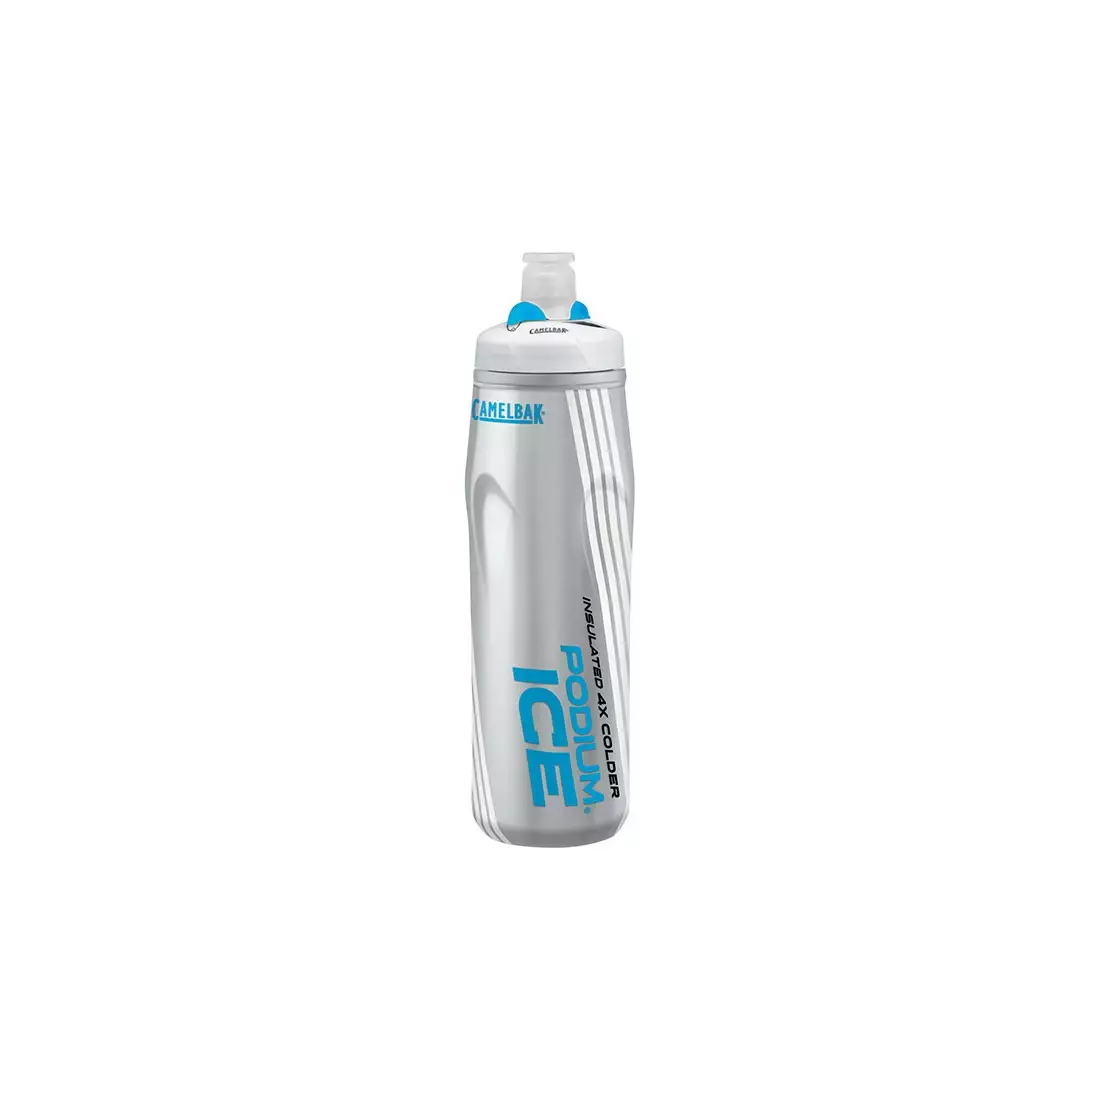 Camelbak SS18 Podium Ice Thermal Cycling Water Bottle 21oz / 620ml Cosmic Blue